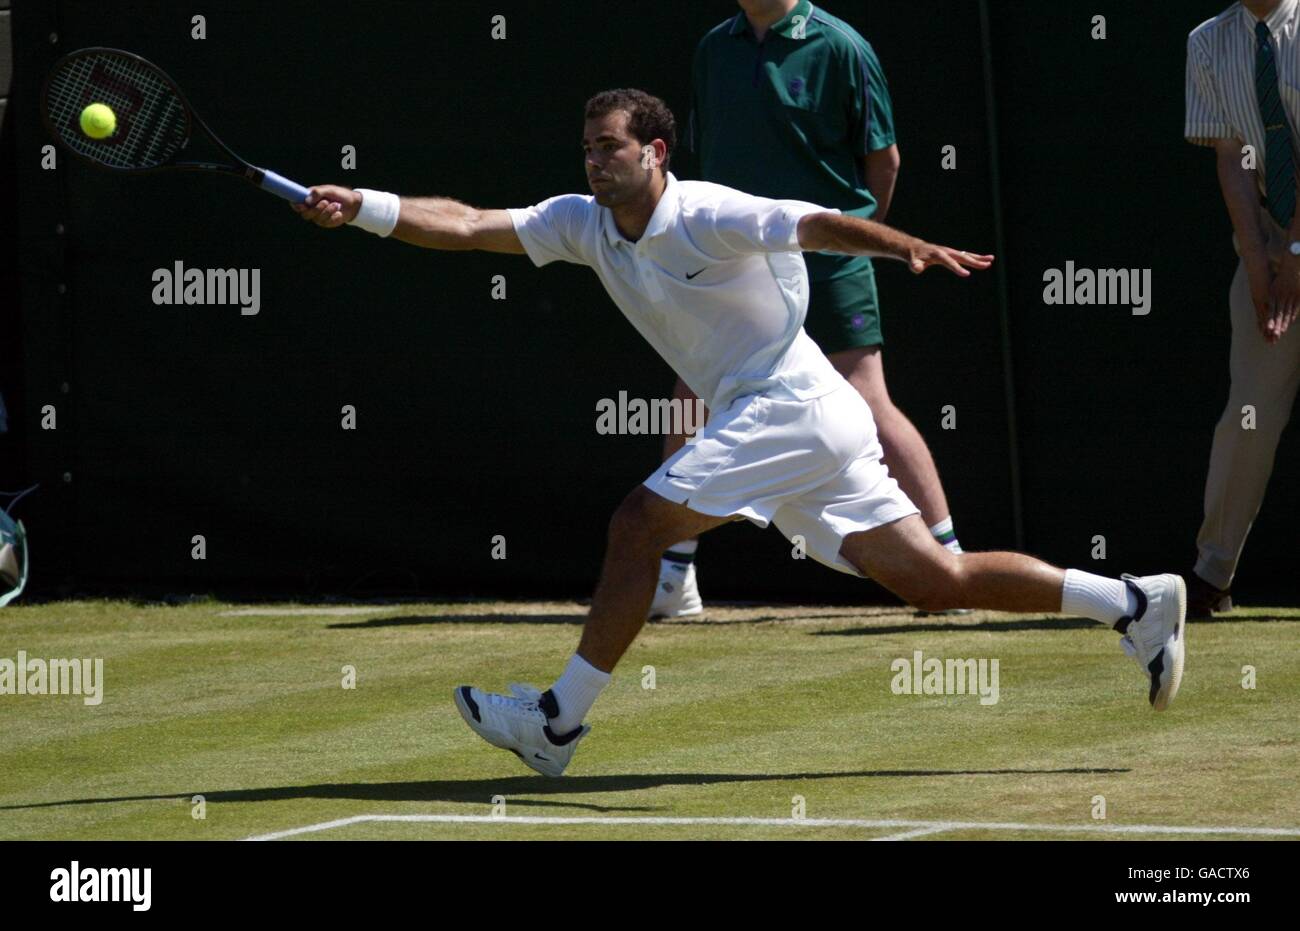 Tennis - Wimbledon 2002 - second Round. Pete Sampras lunges for a ball during his match with George Bastl Stock Photo